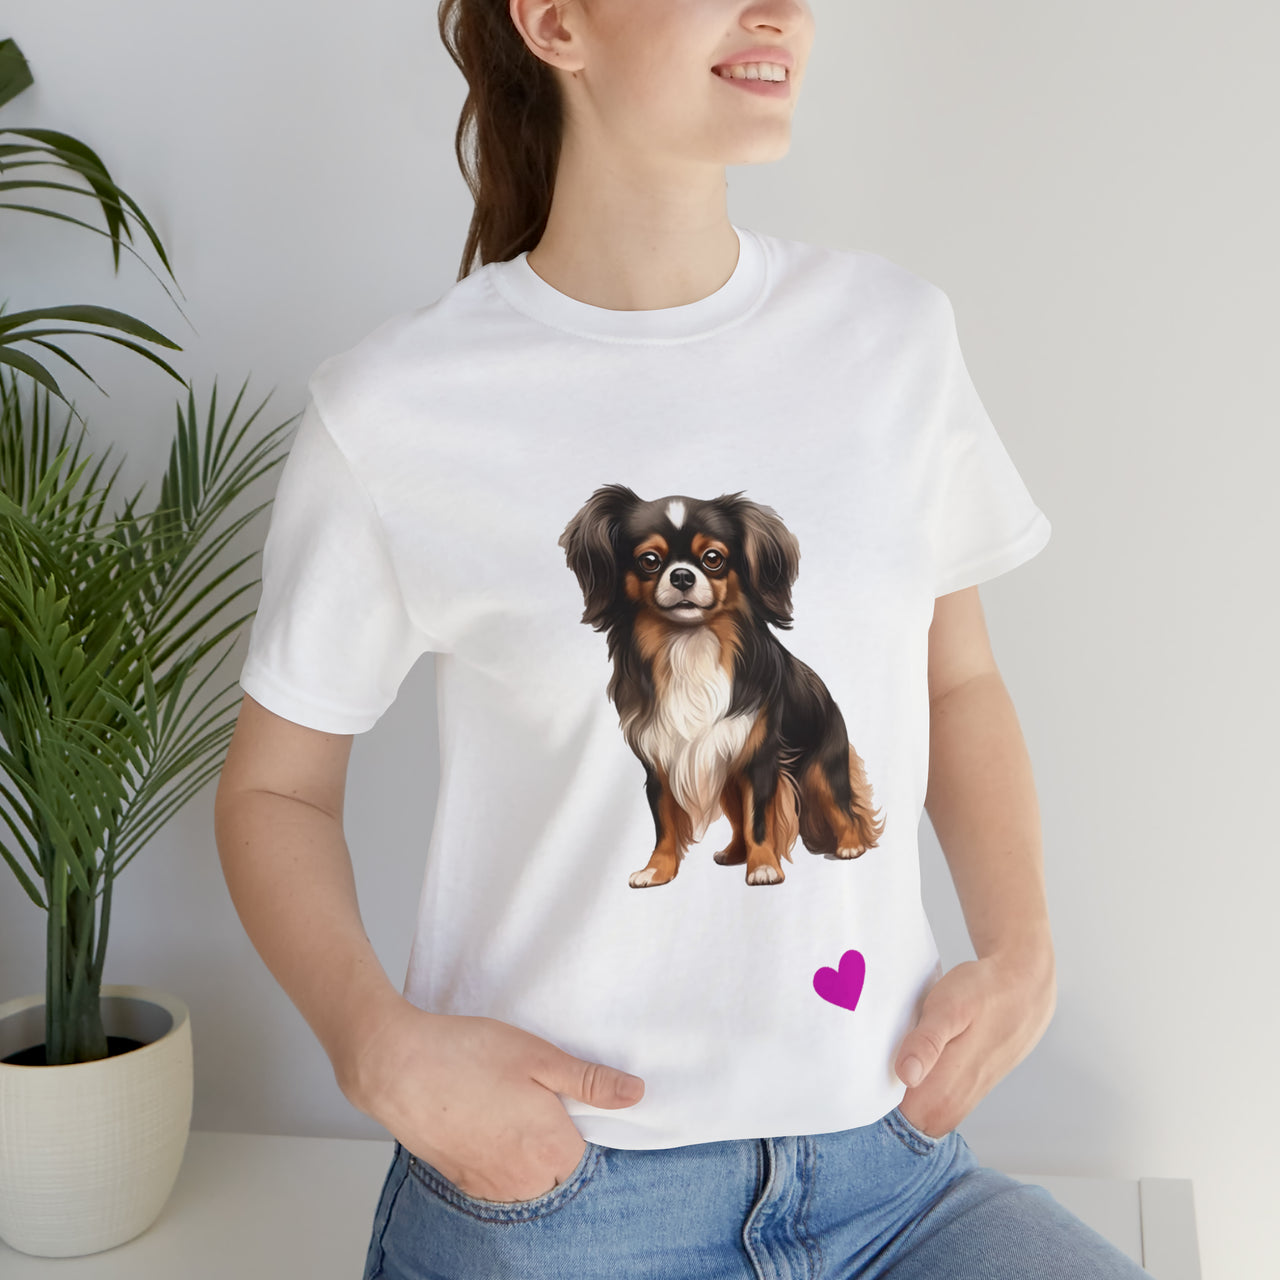 All I Need Is A Dog Unisex Tee